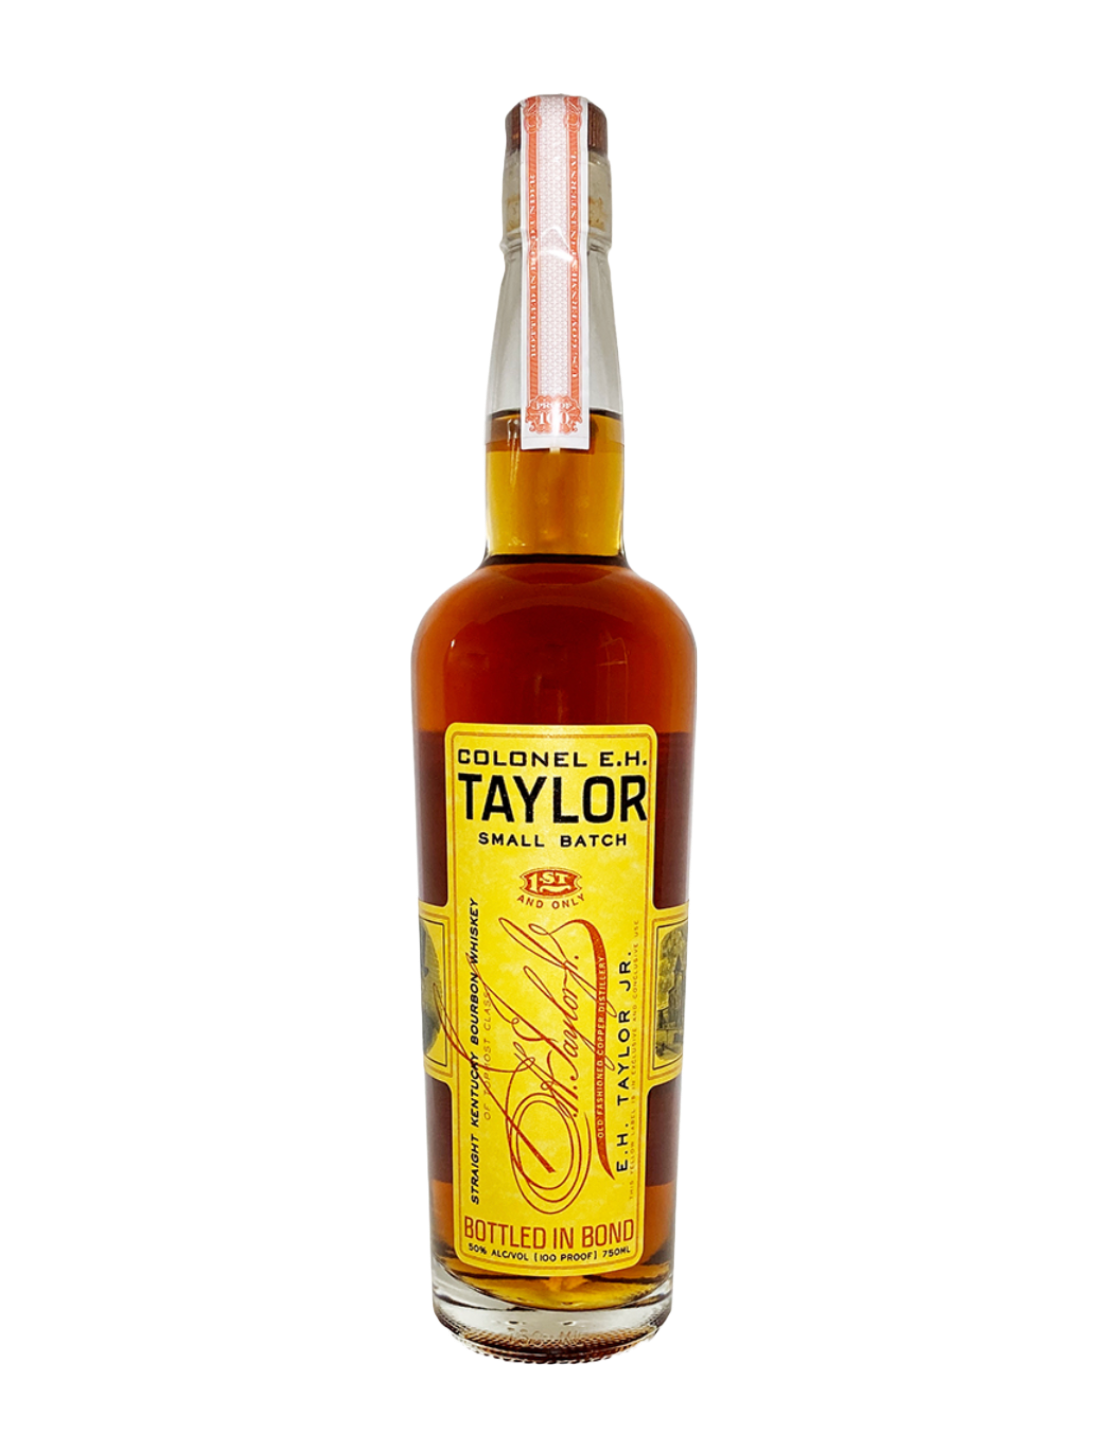 An elegant bottle of Colonel E.H. Taylor, Jr. Small Batch Kentucky Straight Bourbon Whiskey in front of a plain white background